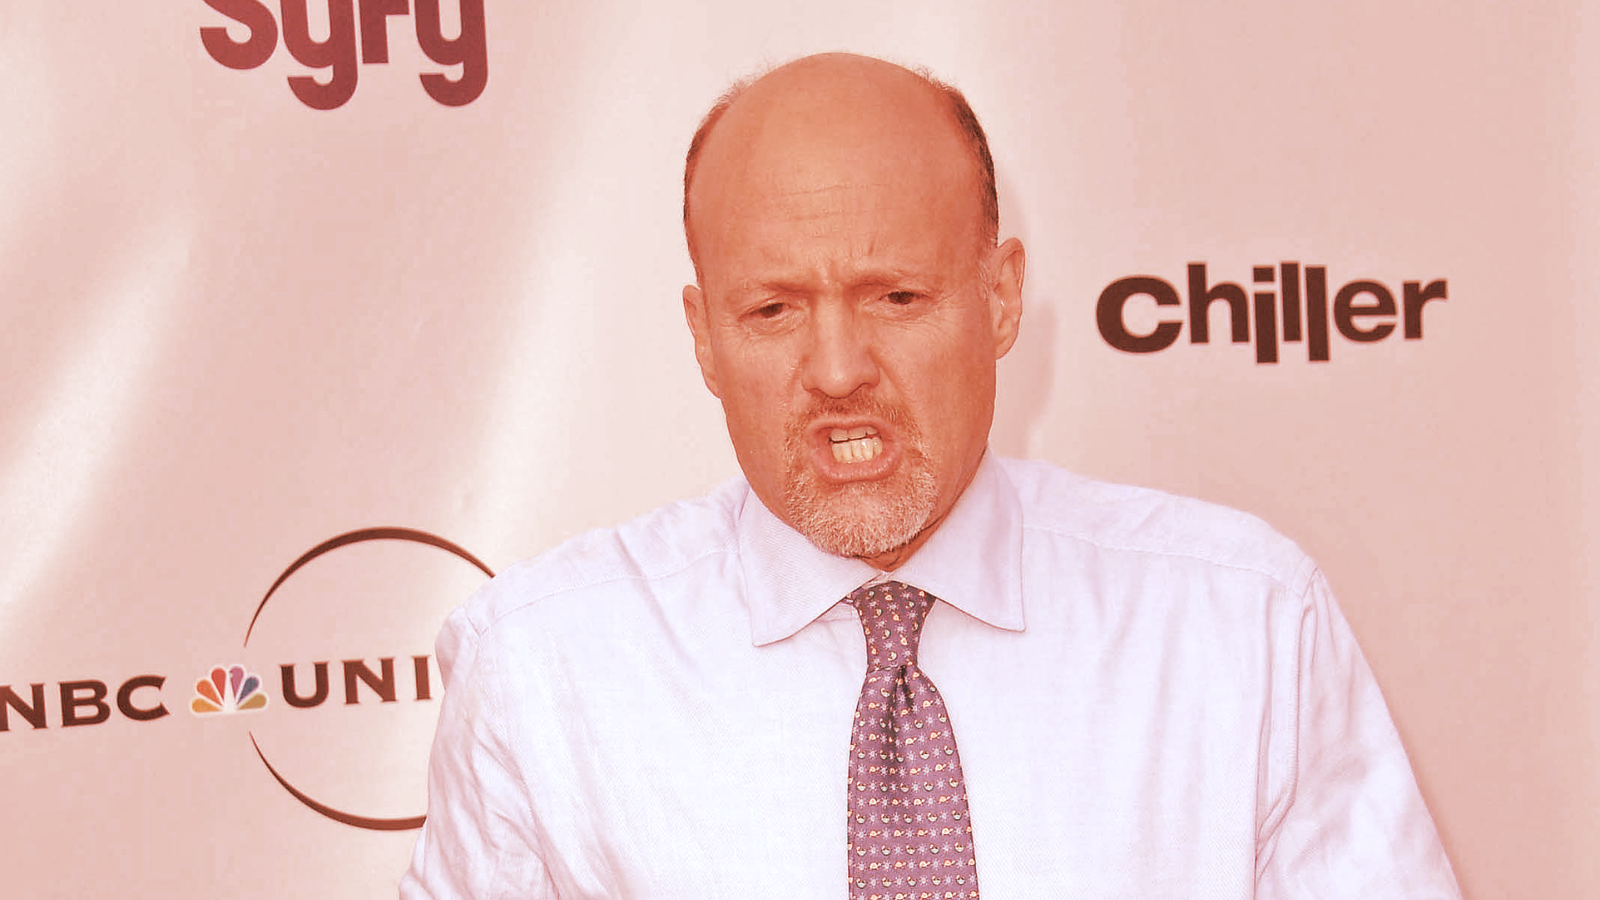 Jim Cramer Says He Bought a Farm With Bitcoin Profits—And Dares You to Bet Against Him